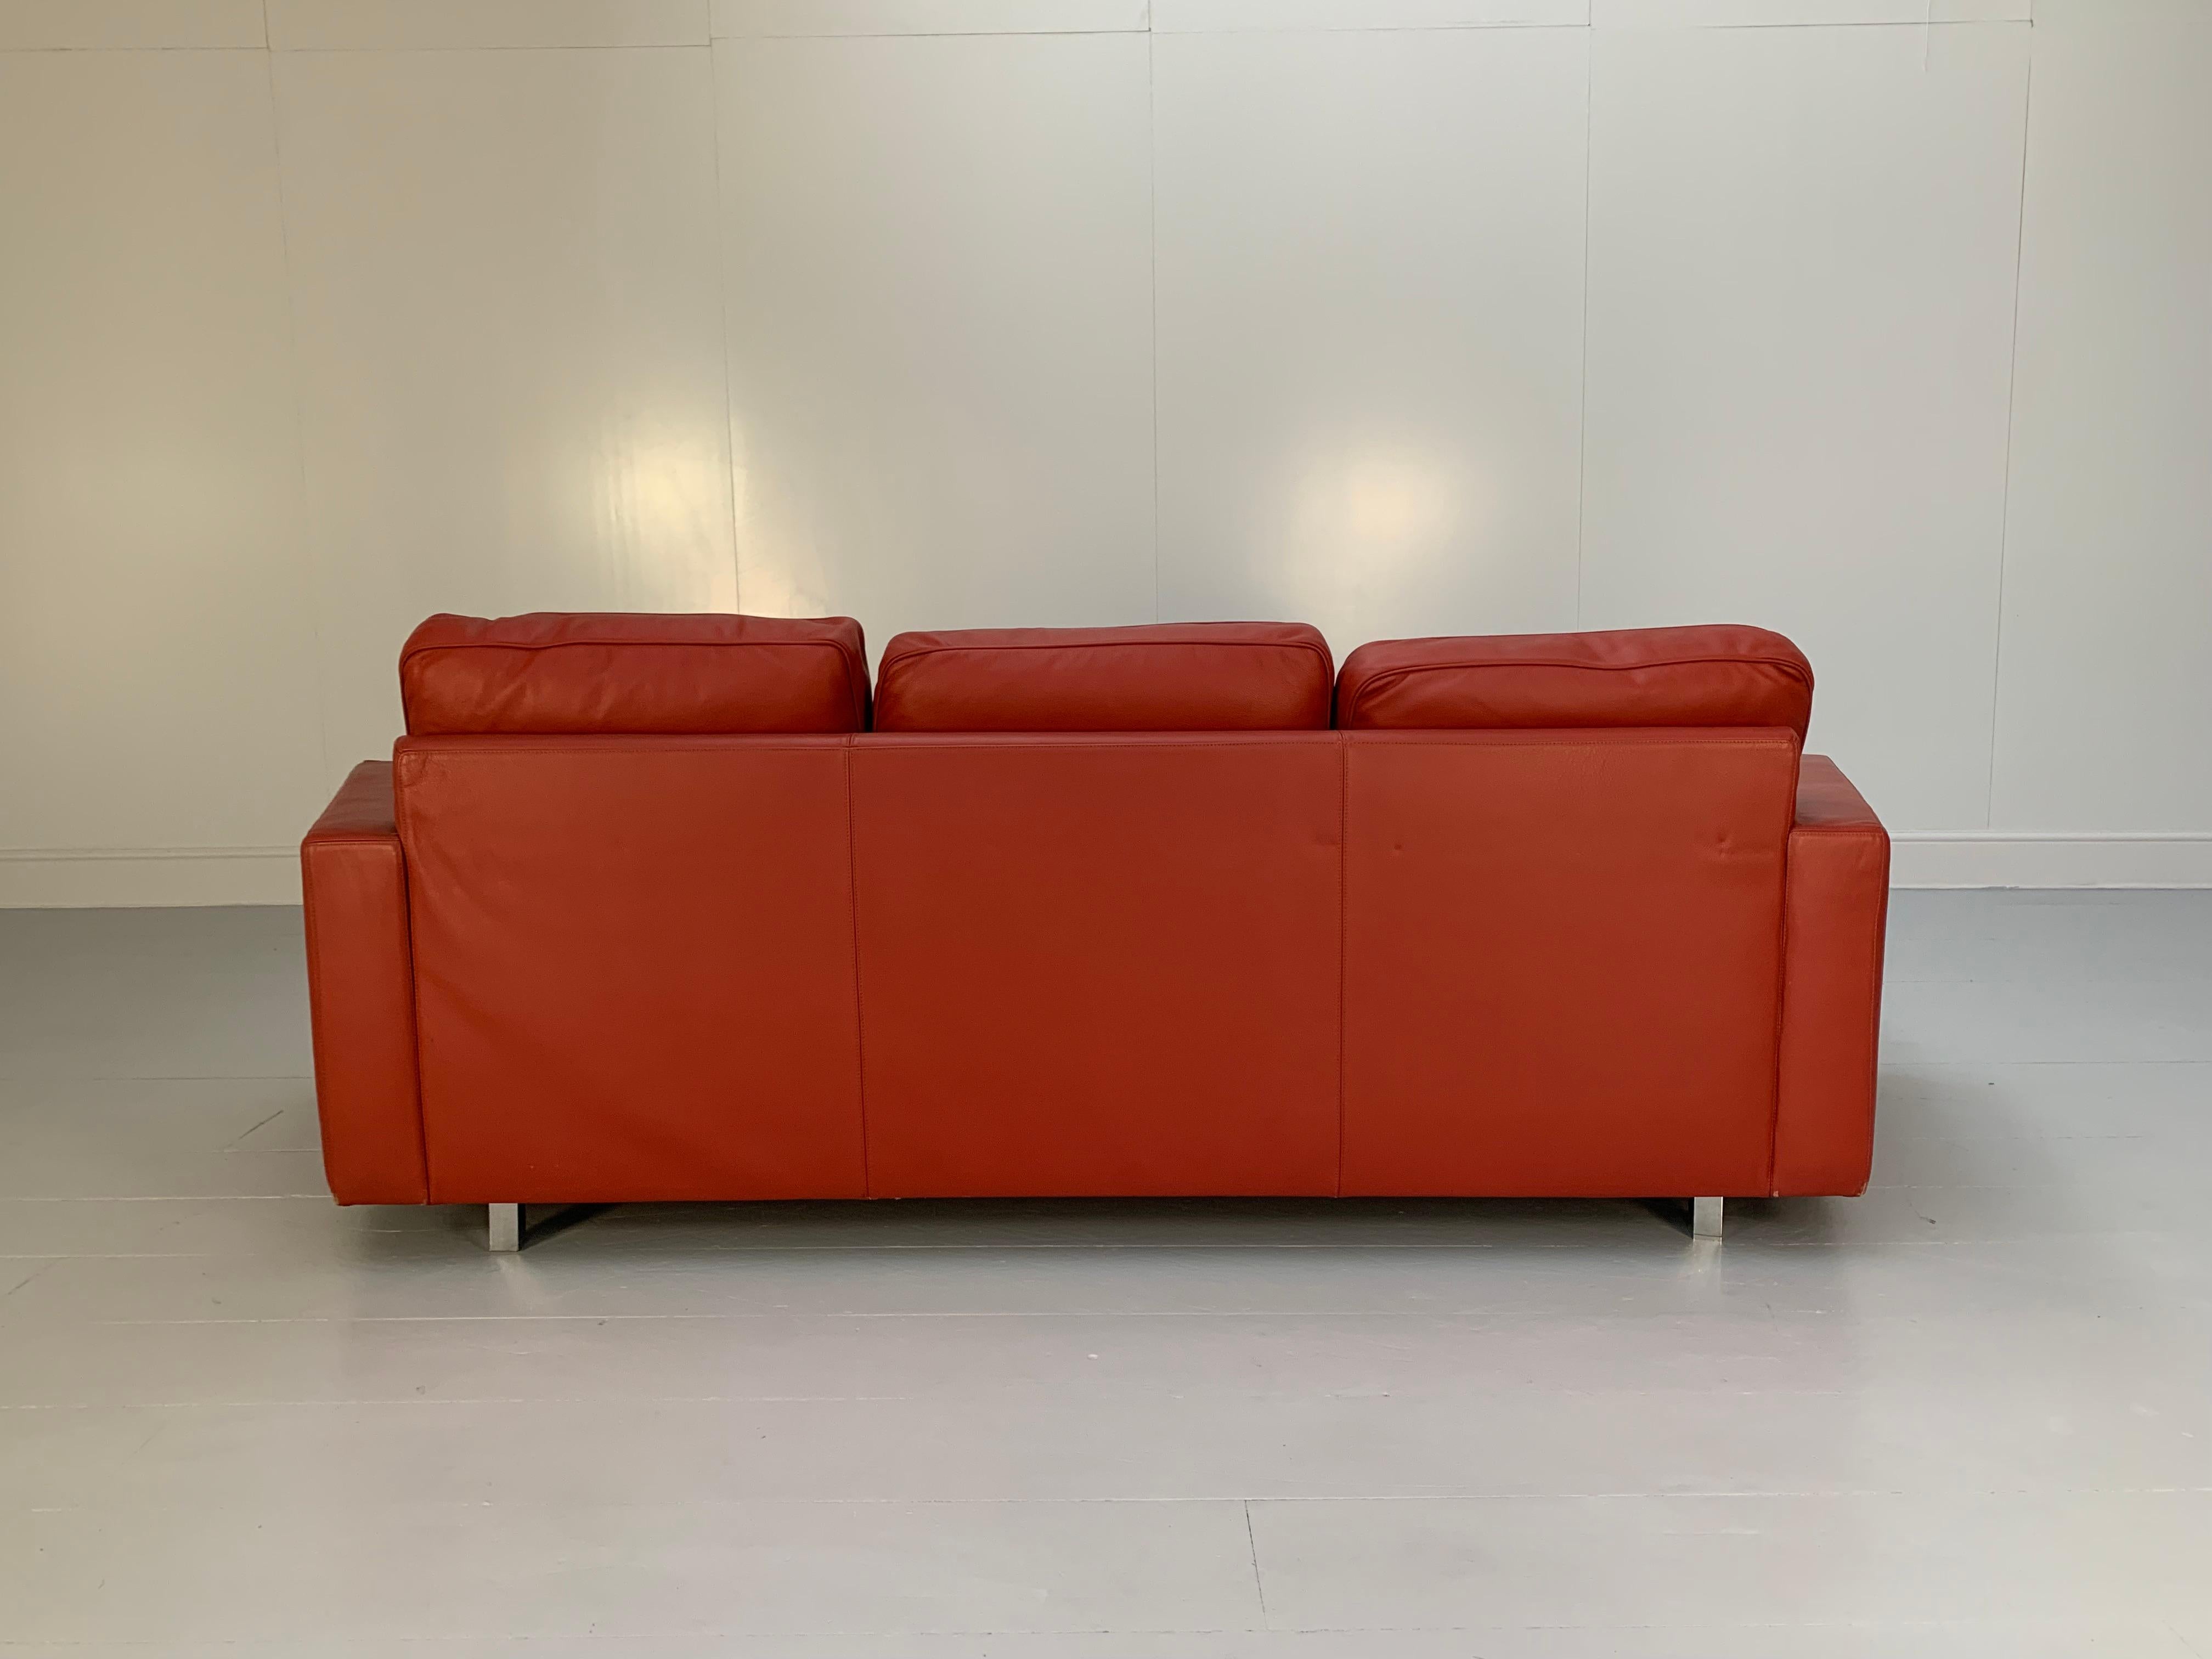 Italian Moroso “Hyde Park” Sofa & 2 Armchair Suite, in Red “Pelle” Leather For Sale